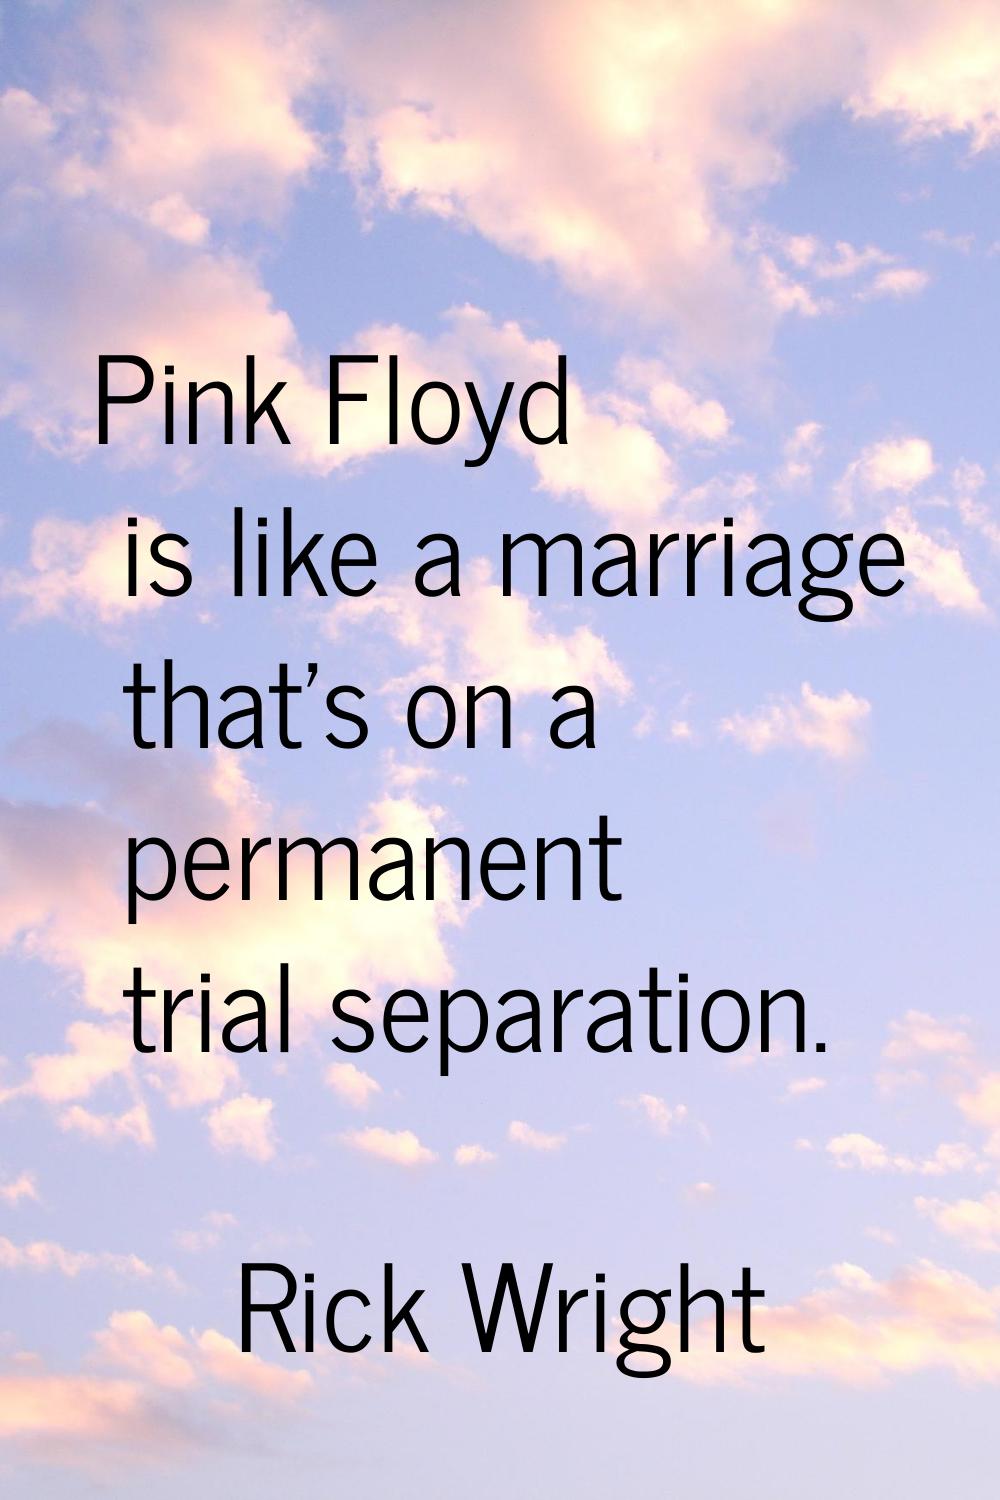 Pink Floyd is like a marriage that's on a permanent trial separation.